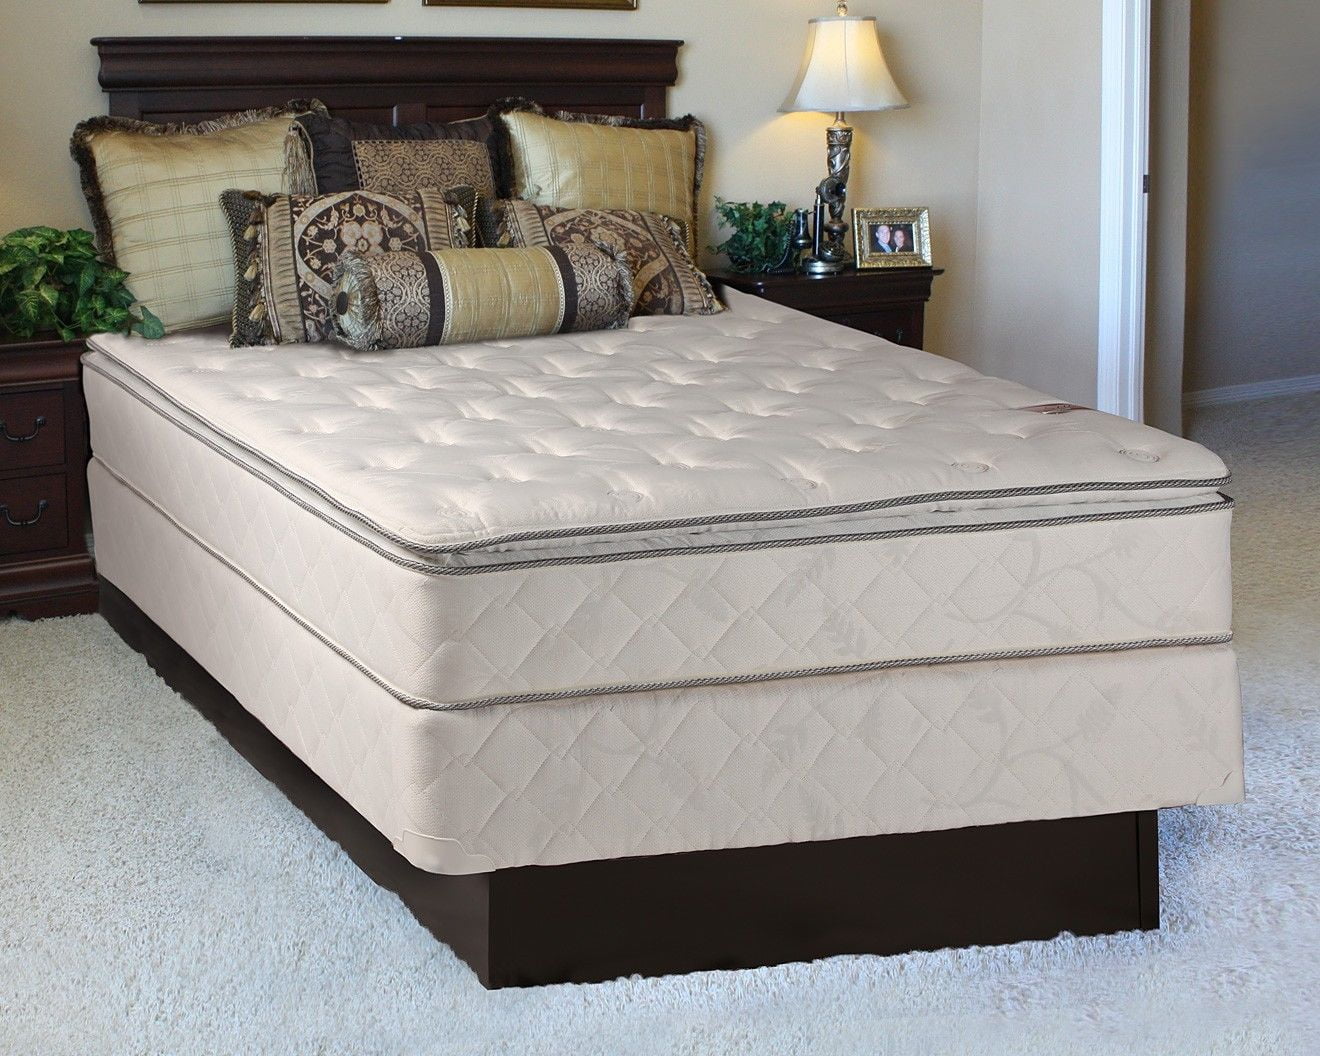 full pillowtop mattress set available for pickup